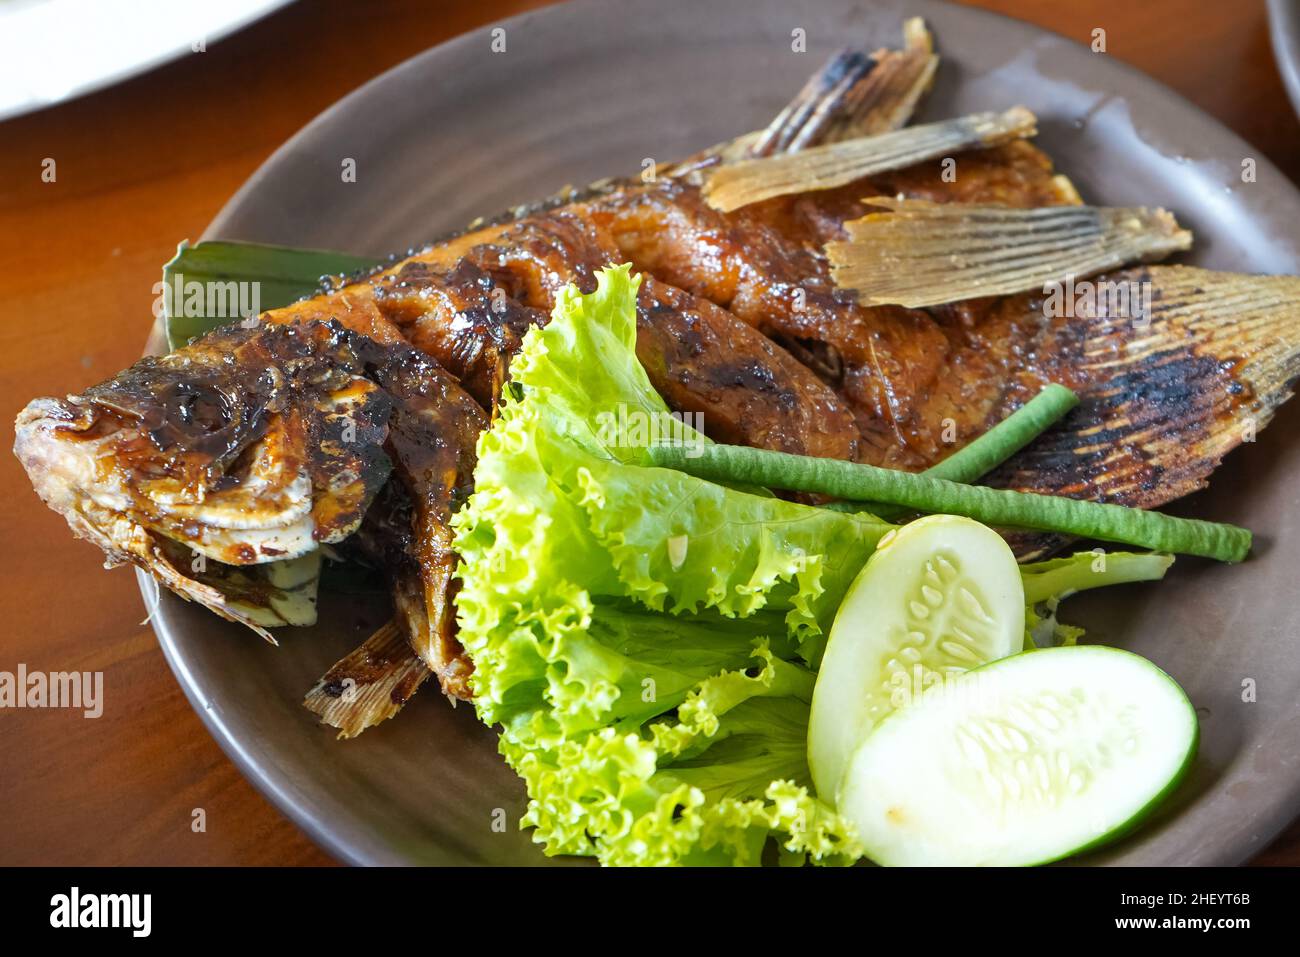 Grilled carp in soy sauce with fresh green vegetables and cucumber on a brown plate in a restaurant. Stock Photo